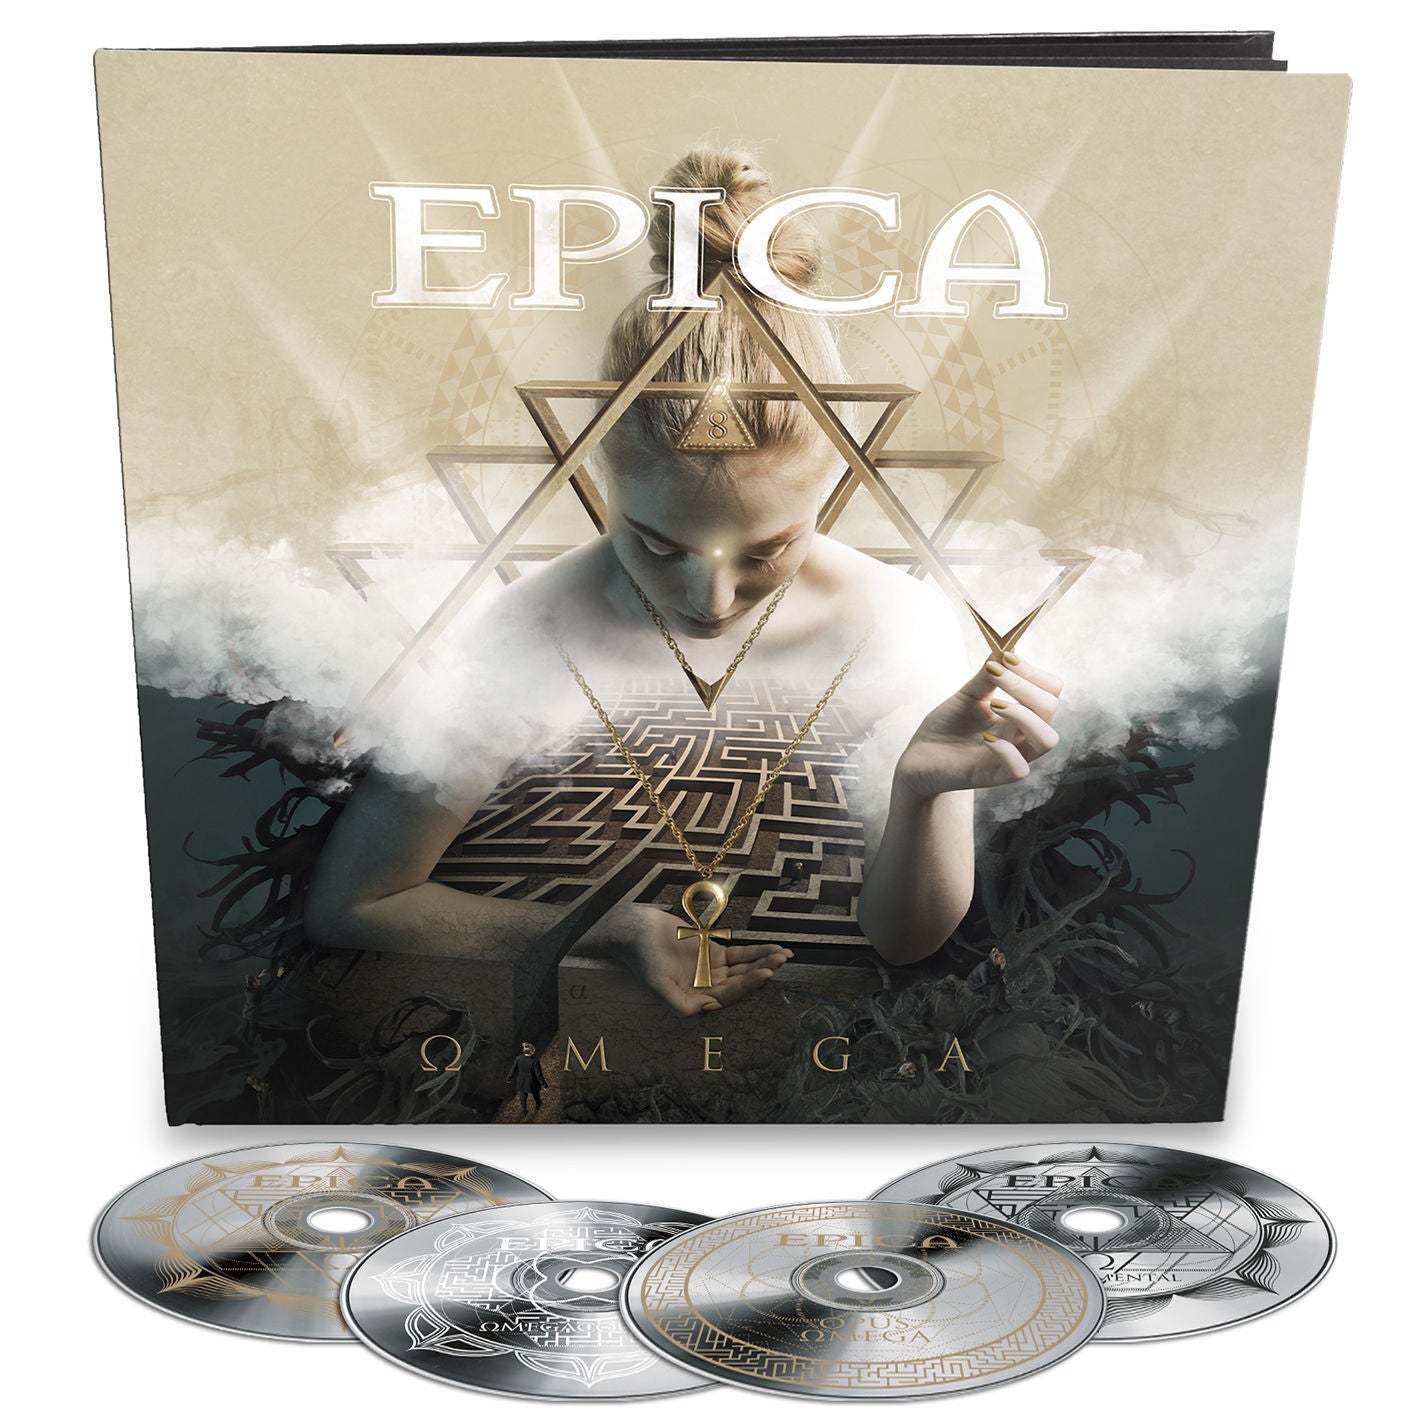 Epica - Omega: Limited Edition 4CD (48-Page Booklet) Earbook